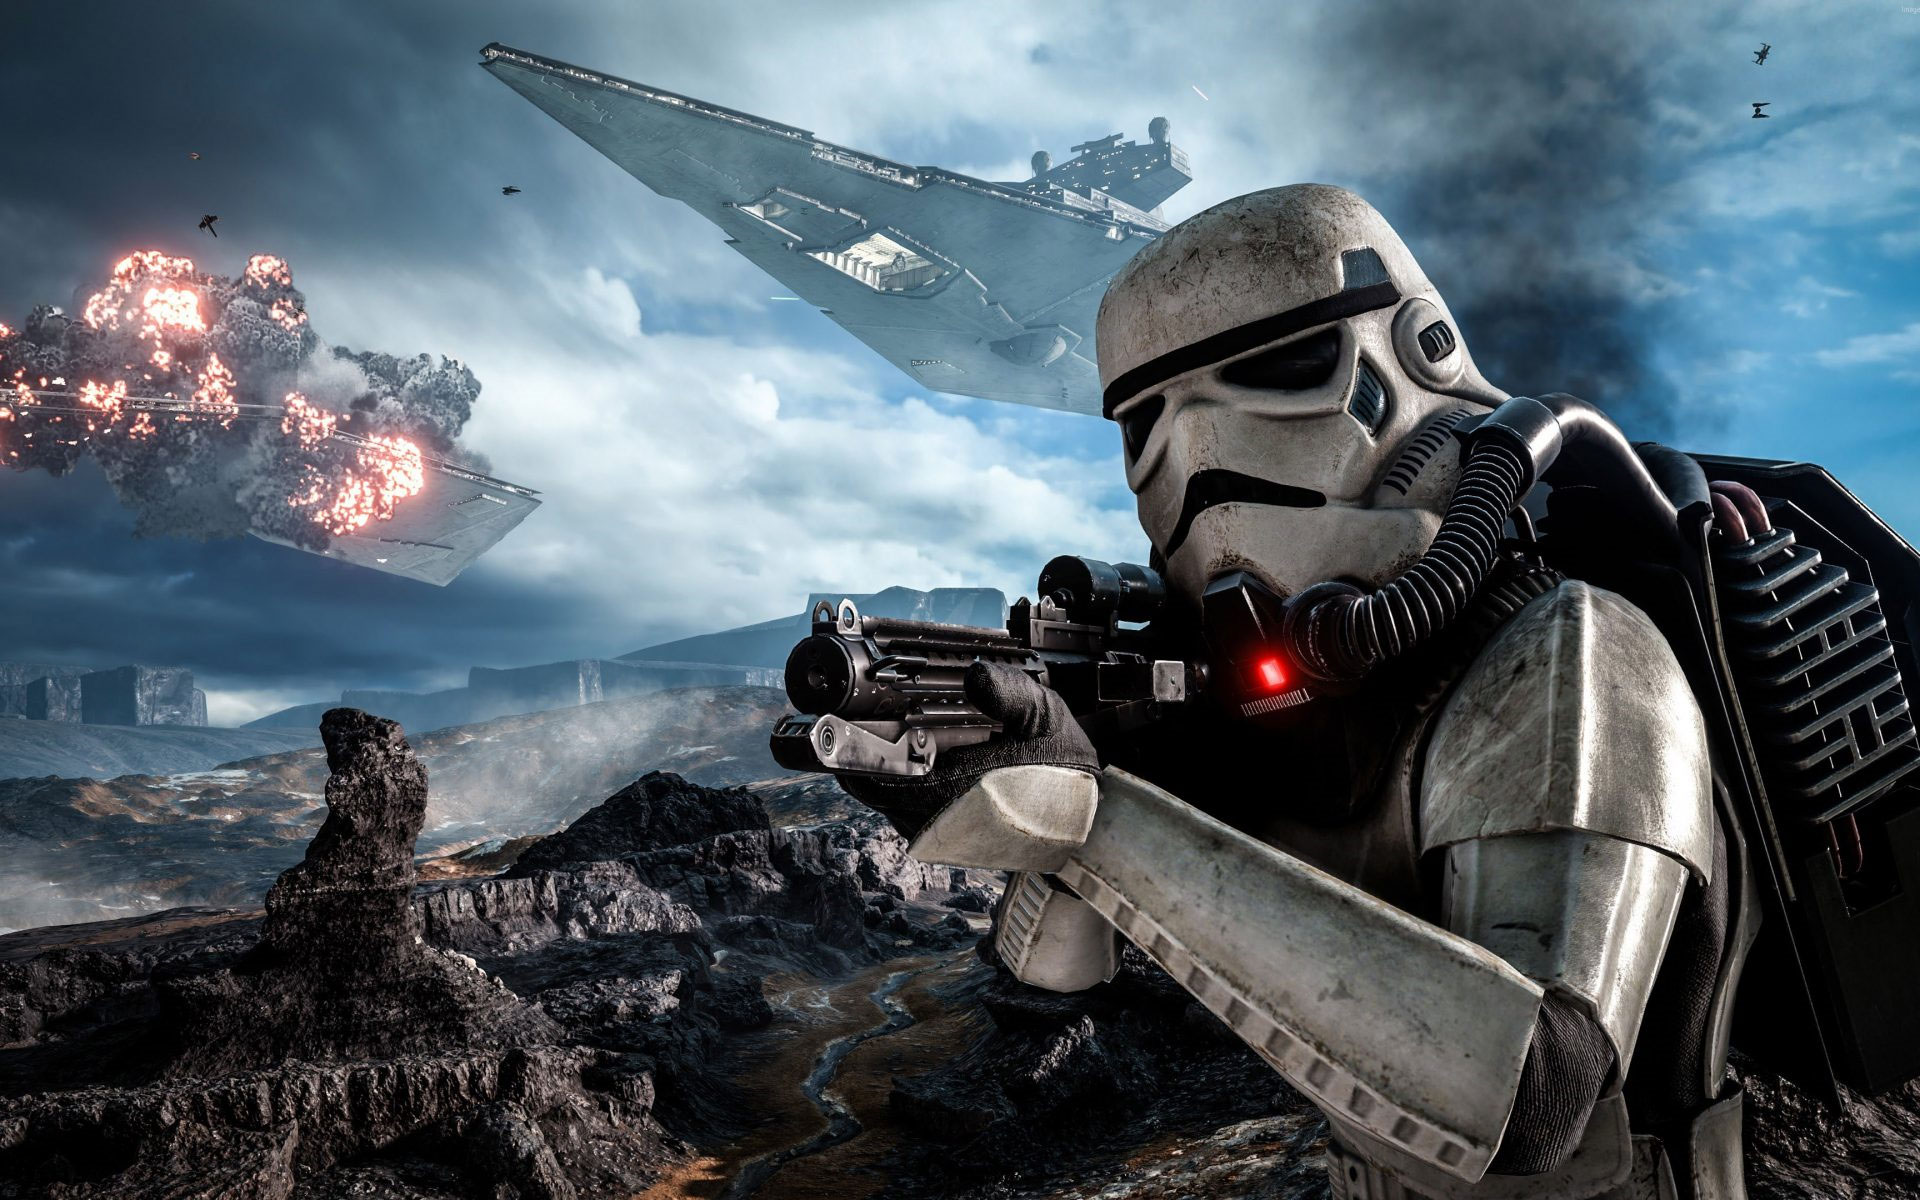 What we want from Star Wars Battlefront 2